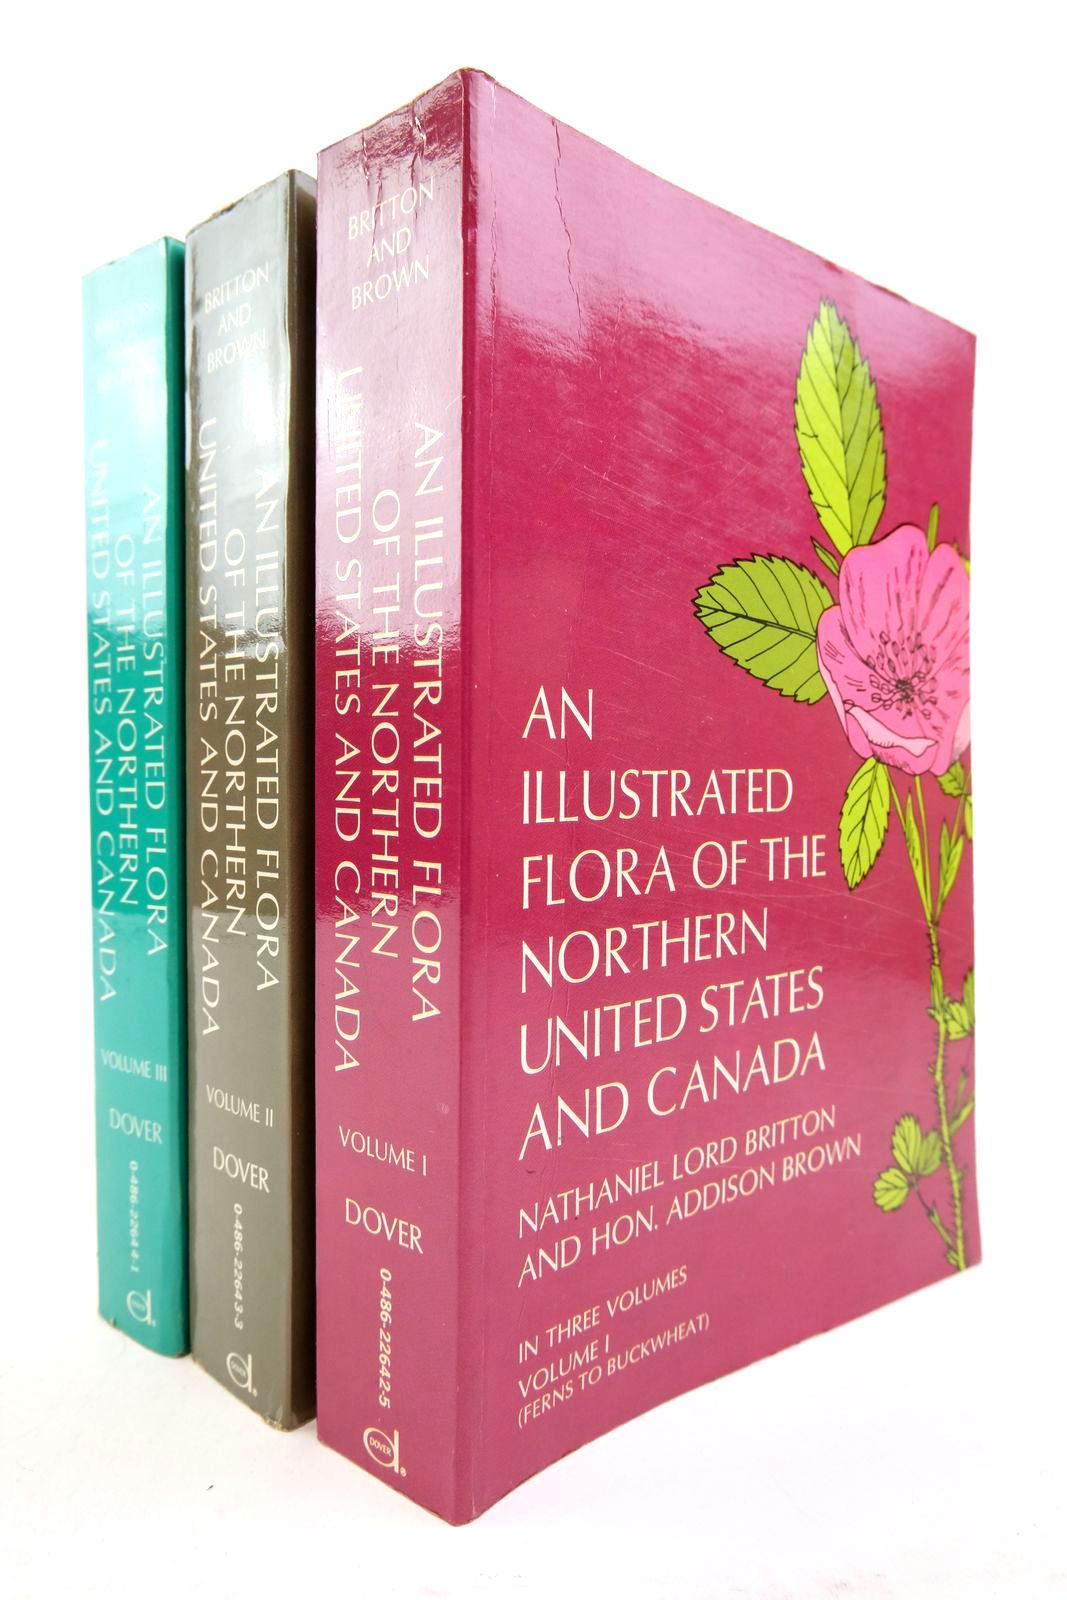 Photo of AN ILLUSTRATED FLORA OF THE NORTHERN UNITED STATES AND CANADA (3 VOLUMES) written by Britton, Nathaniel Brown, Addison published by Dover Publications Inc. (STOCK CODE: 2140091)  for sale by Stella & Rose's Books